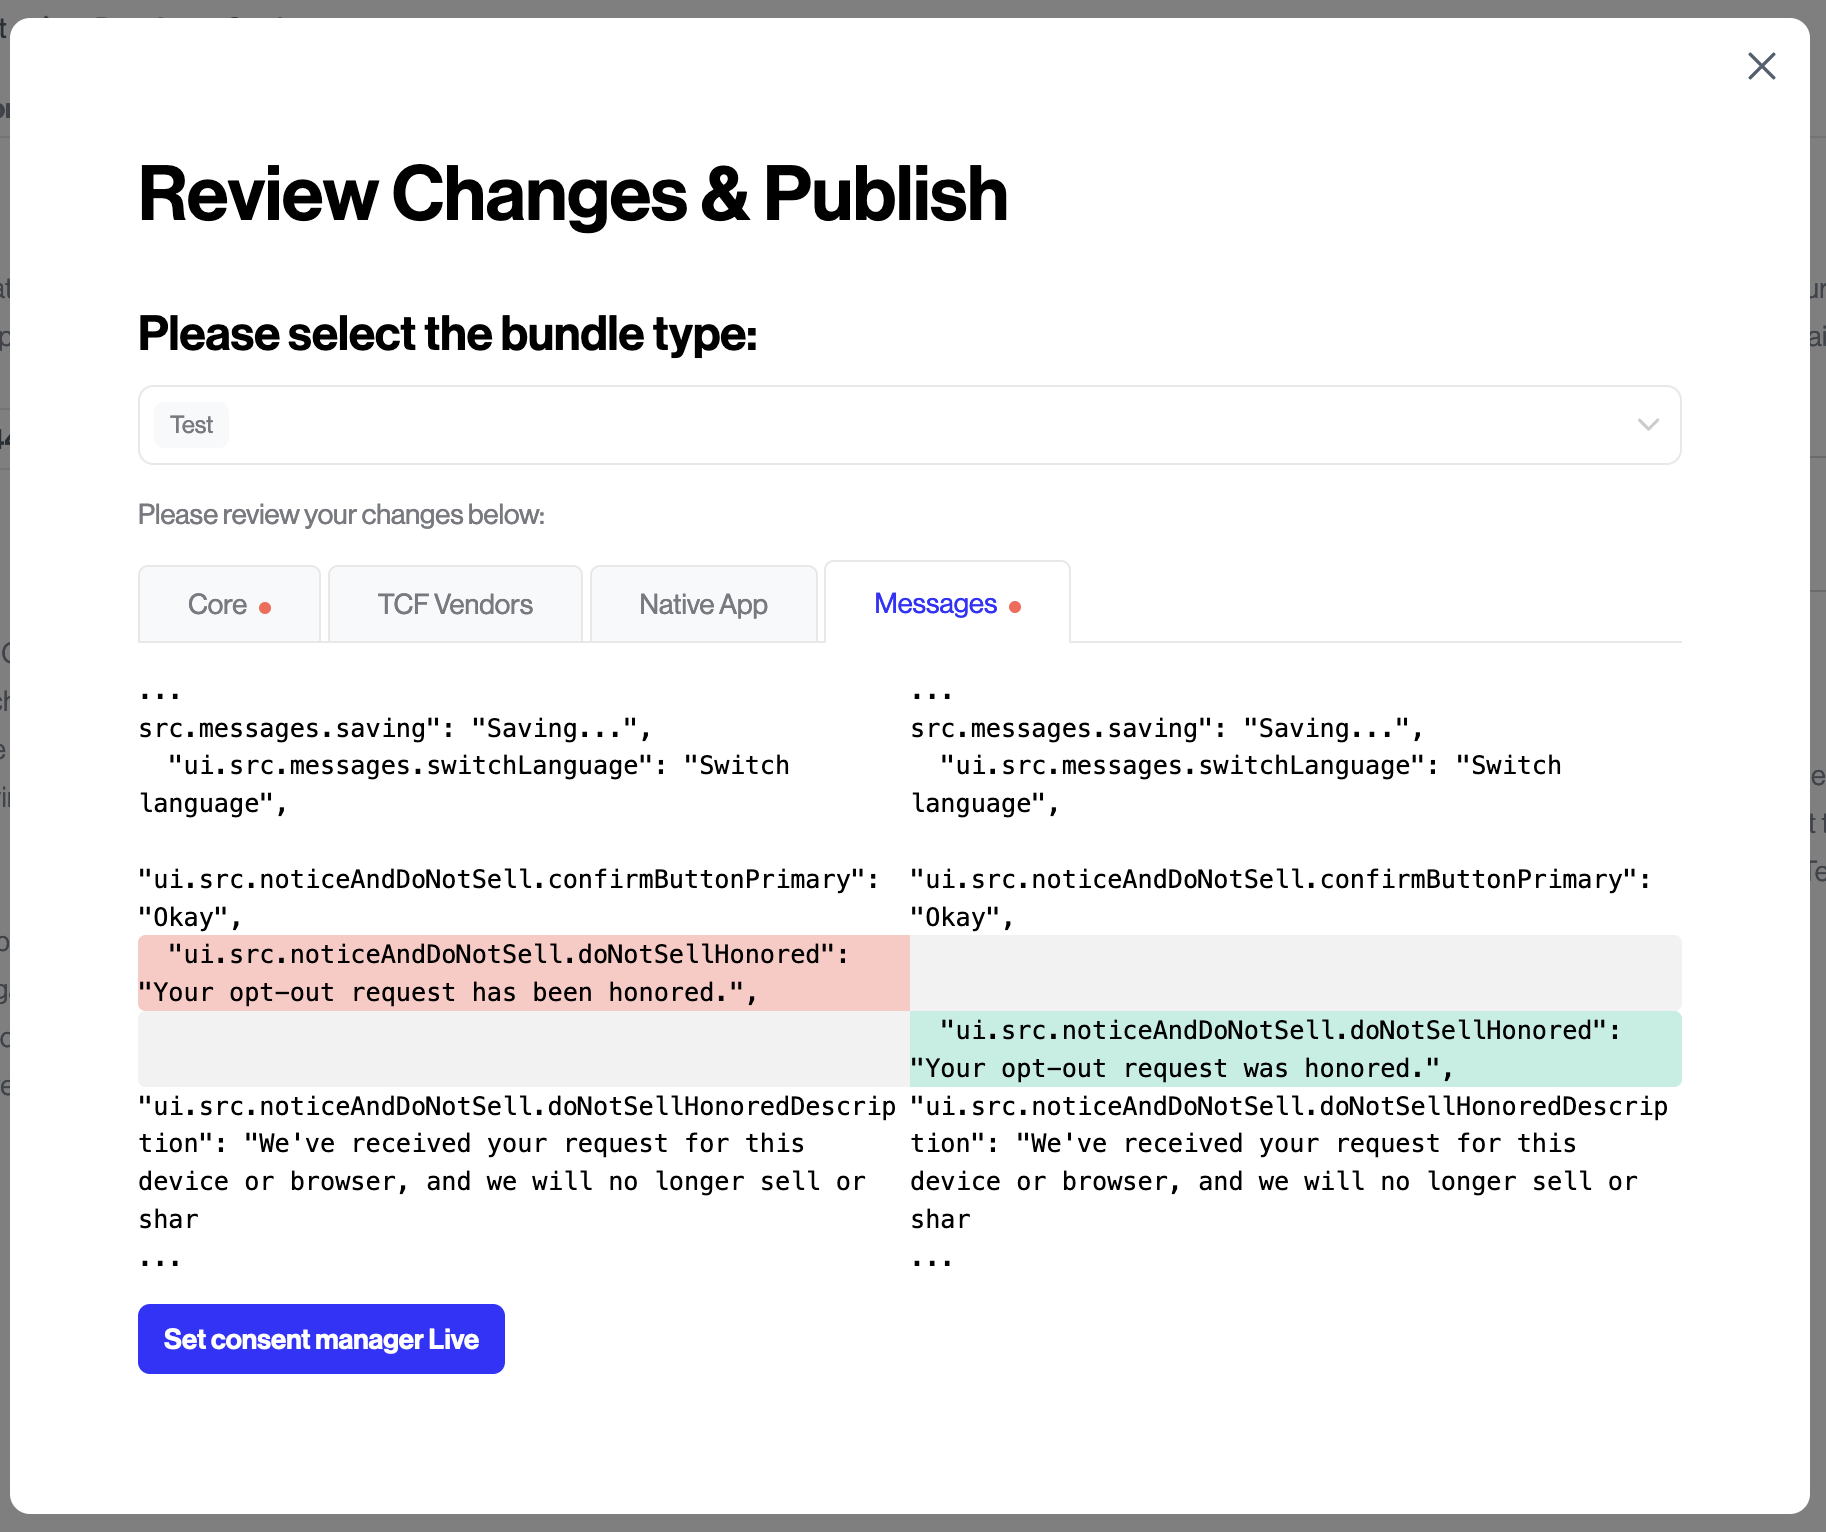 Review the changes to the Consent Manager UI